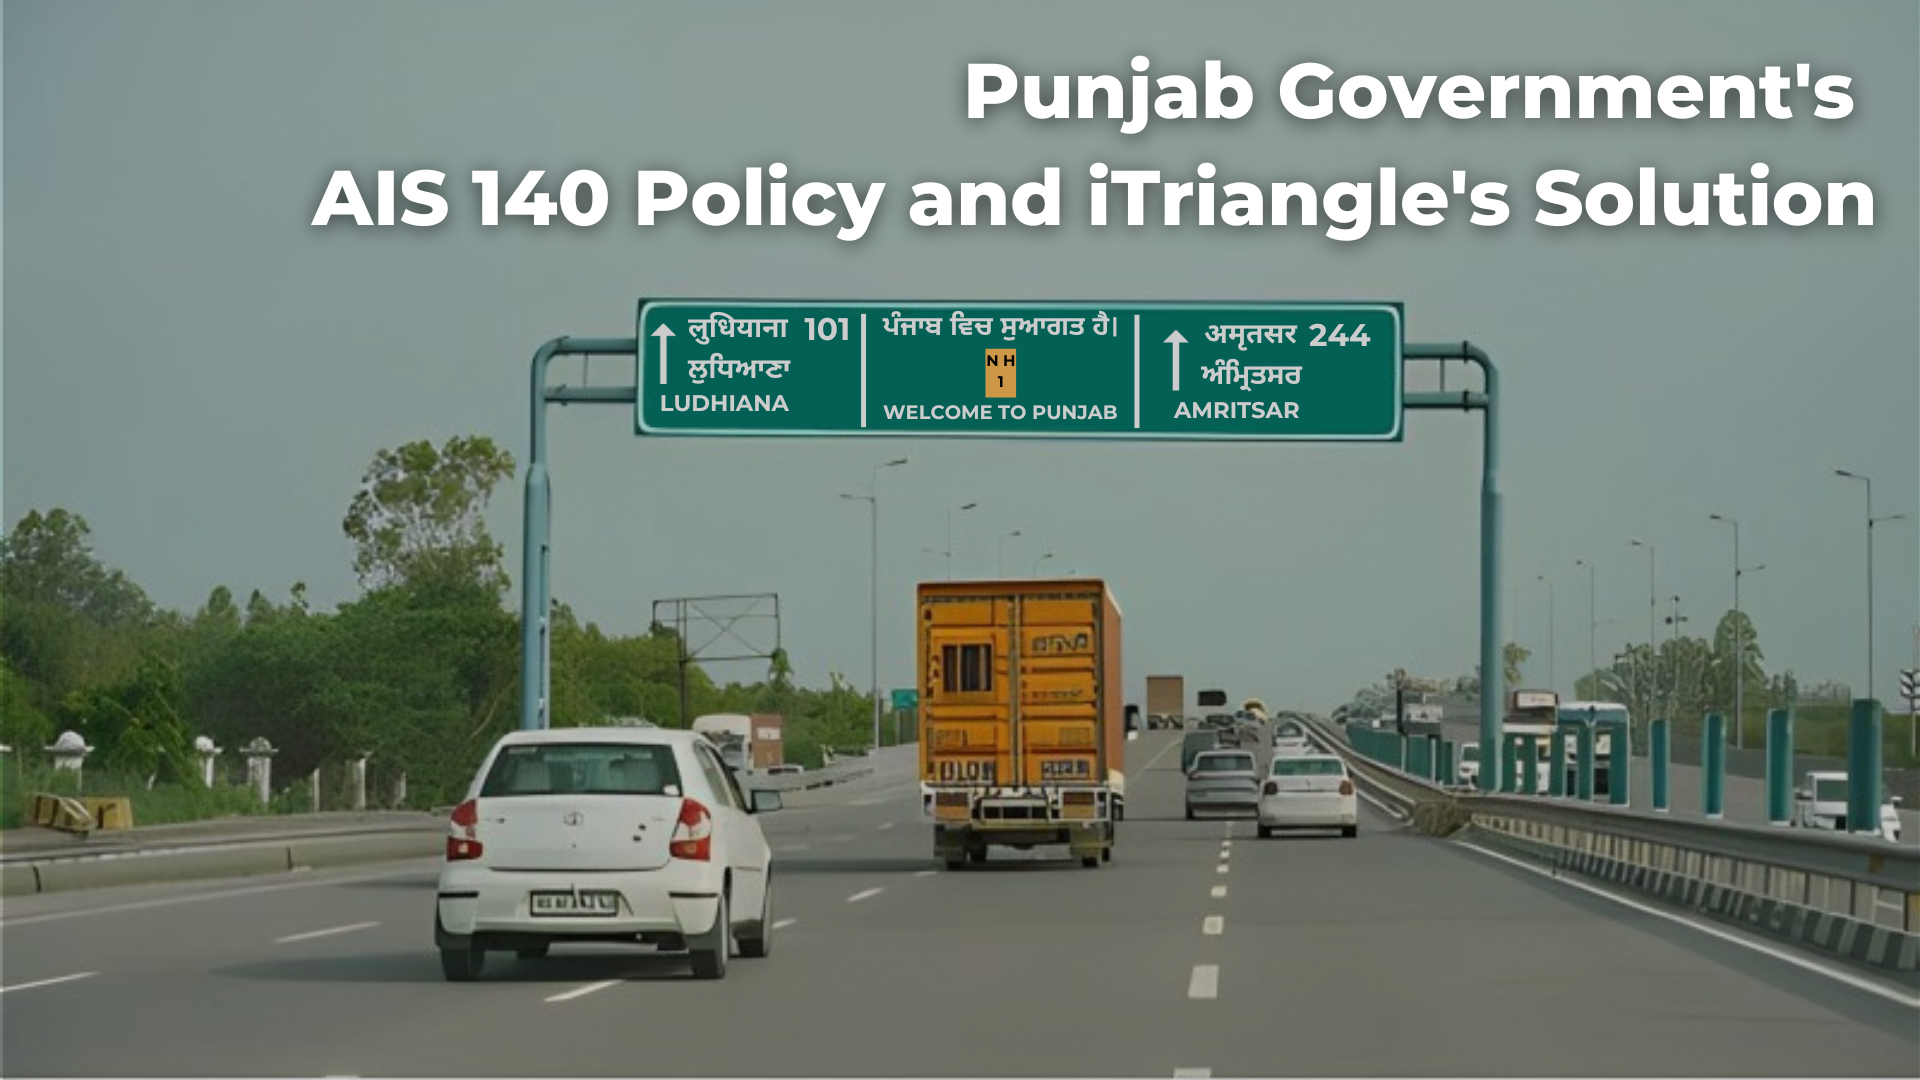 Punjab Government’s AIS 140 Policy and iTriangle’s Solution